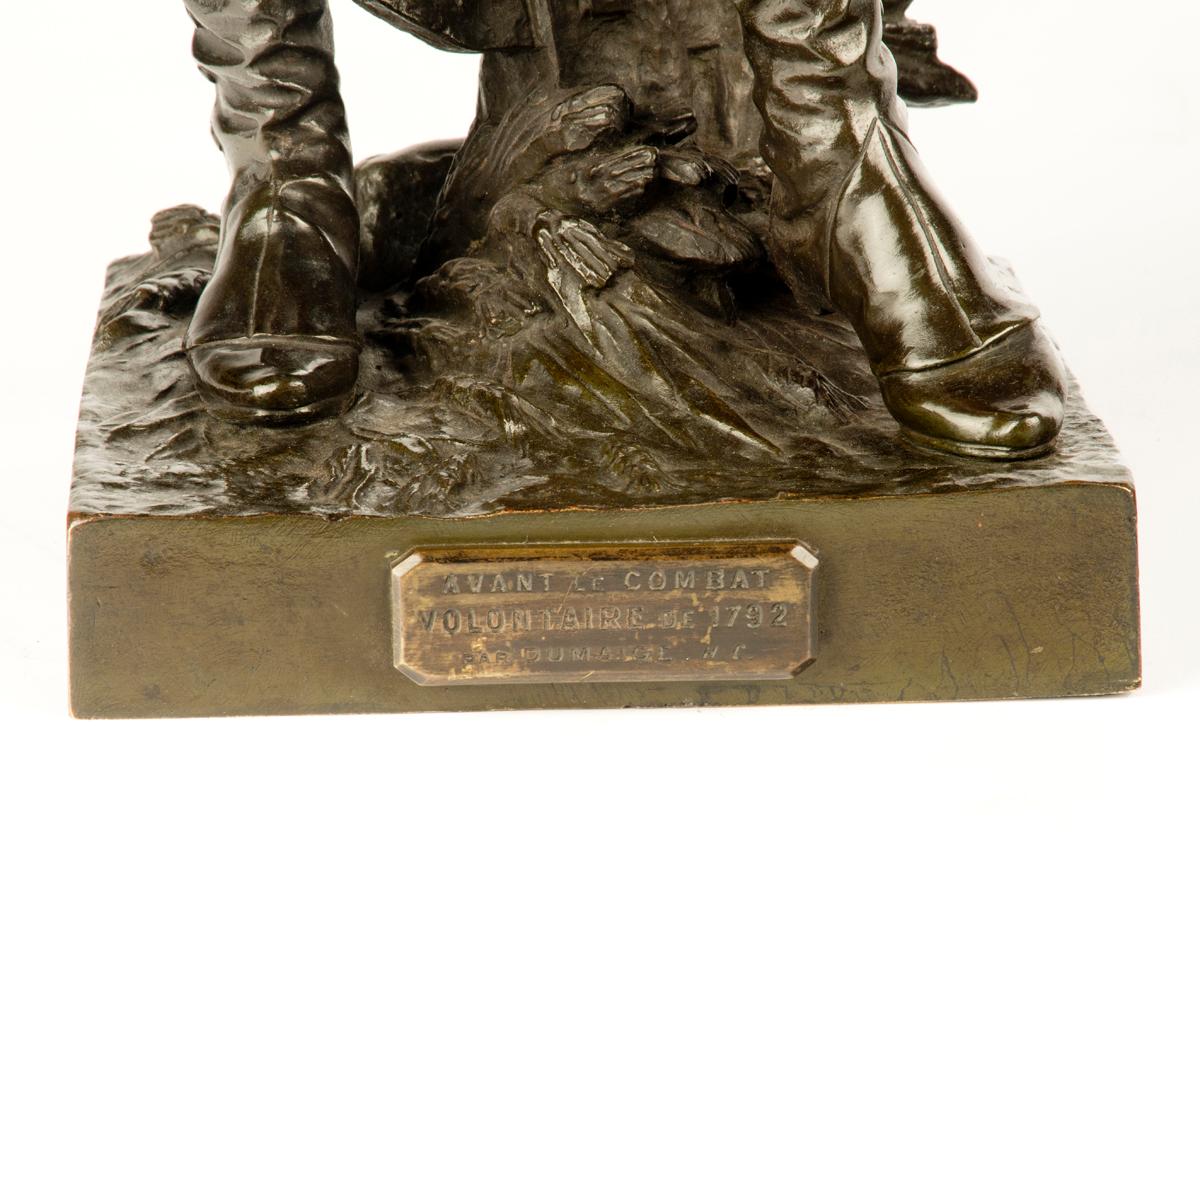 A pair of bronze figures entitled ‘Avant le combat’ and ‘Après le combat’ cast from models by Etienne-Henri Dumaige, each showing a French infantry officer, and the other adjusting the strings of his drum with a plaque stating ‘Après Combat